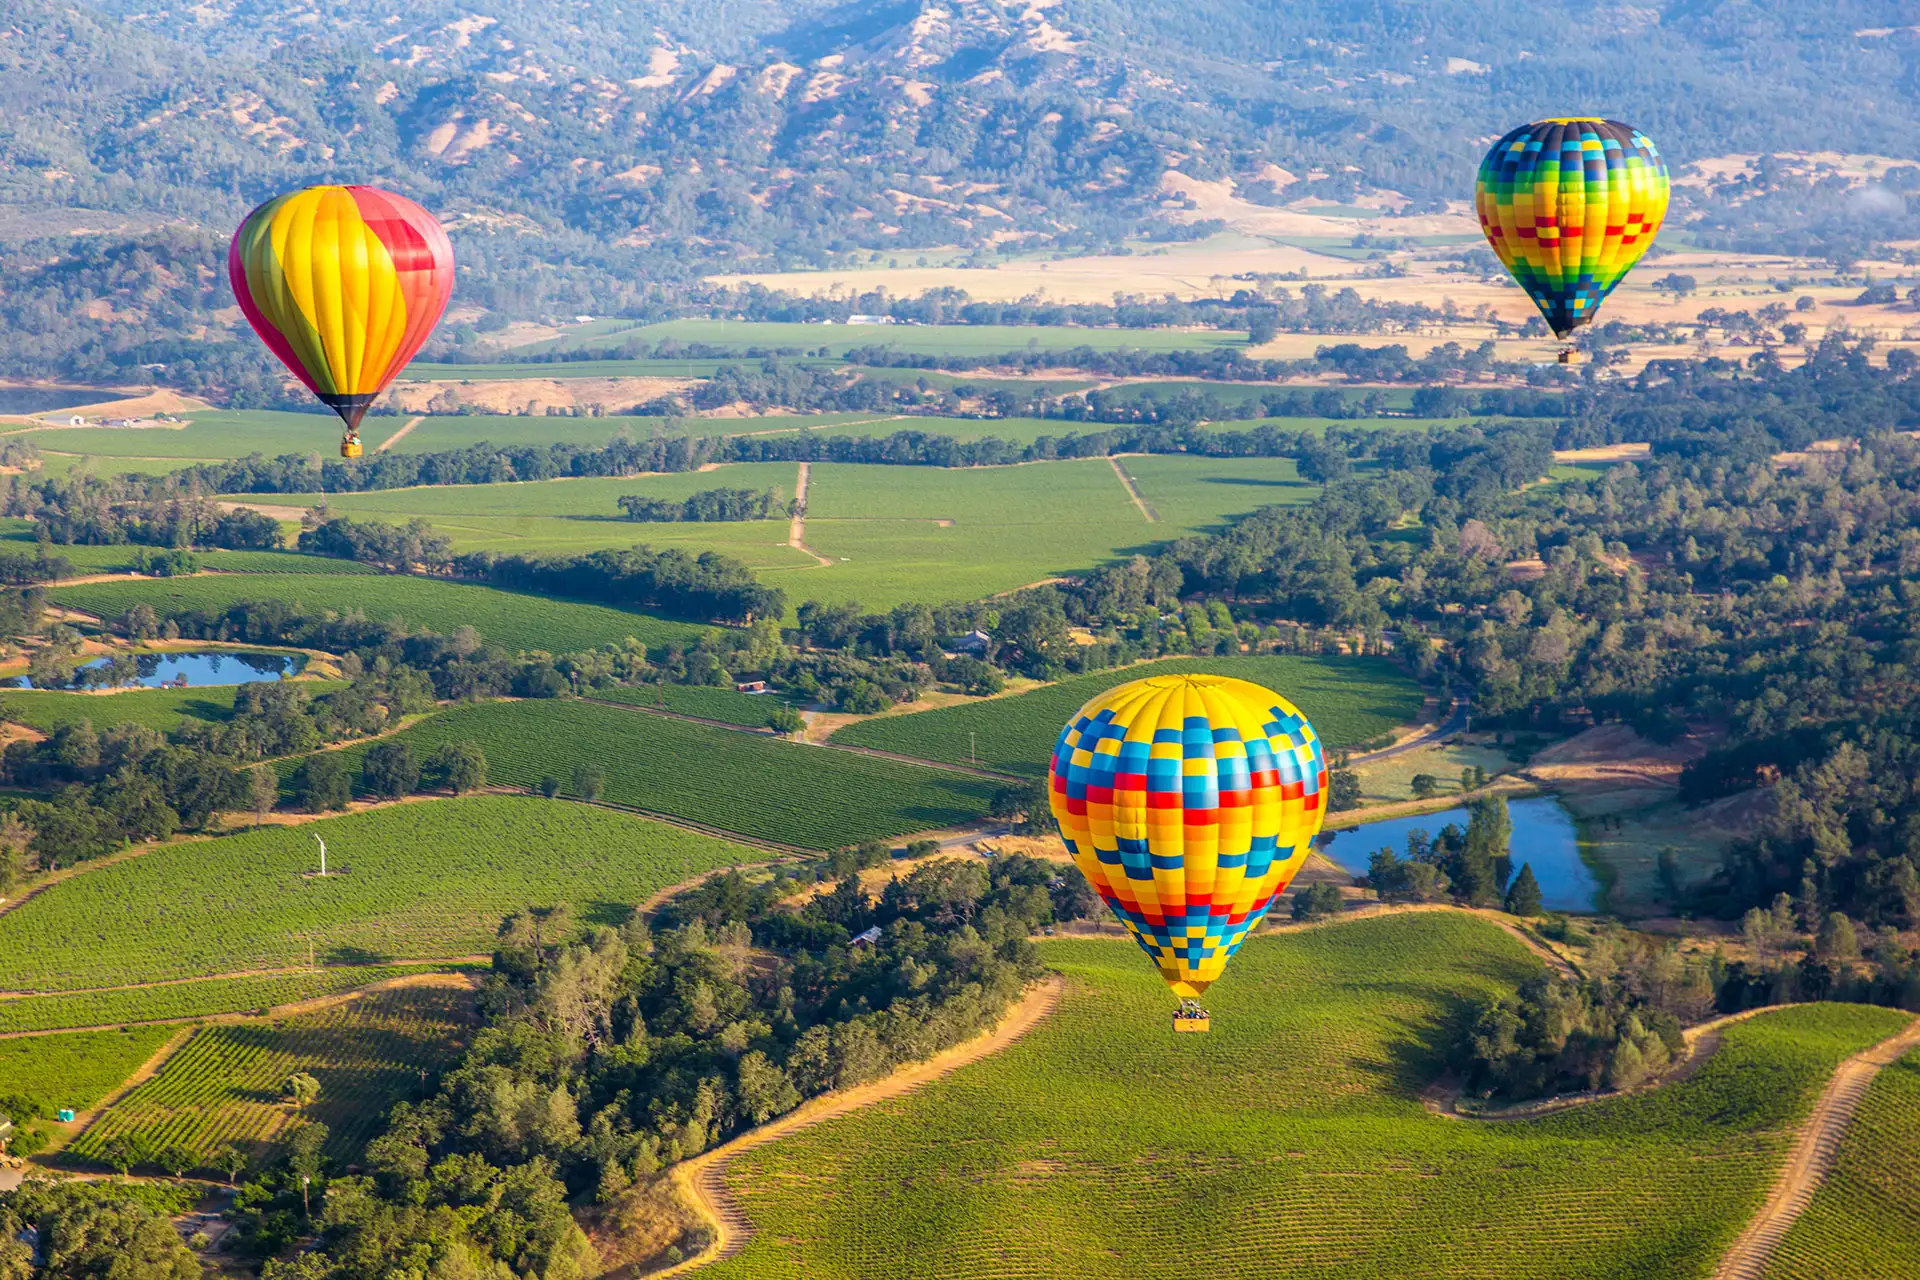 Napa Valley, California; Courtesy of cheng/chengShutterstock.com